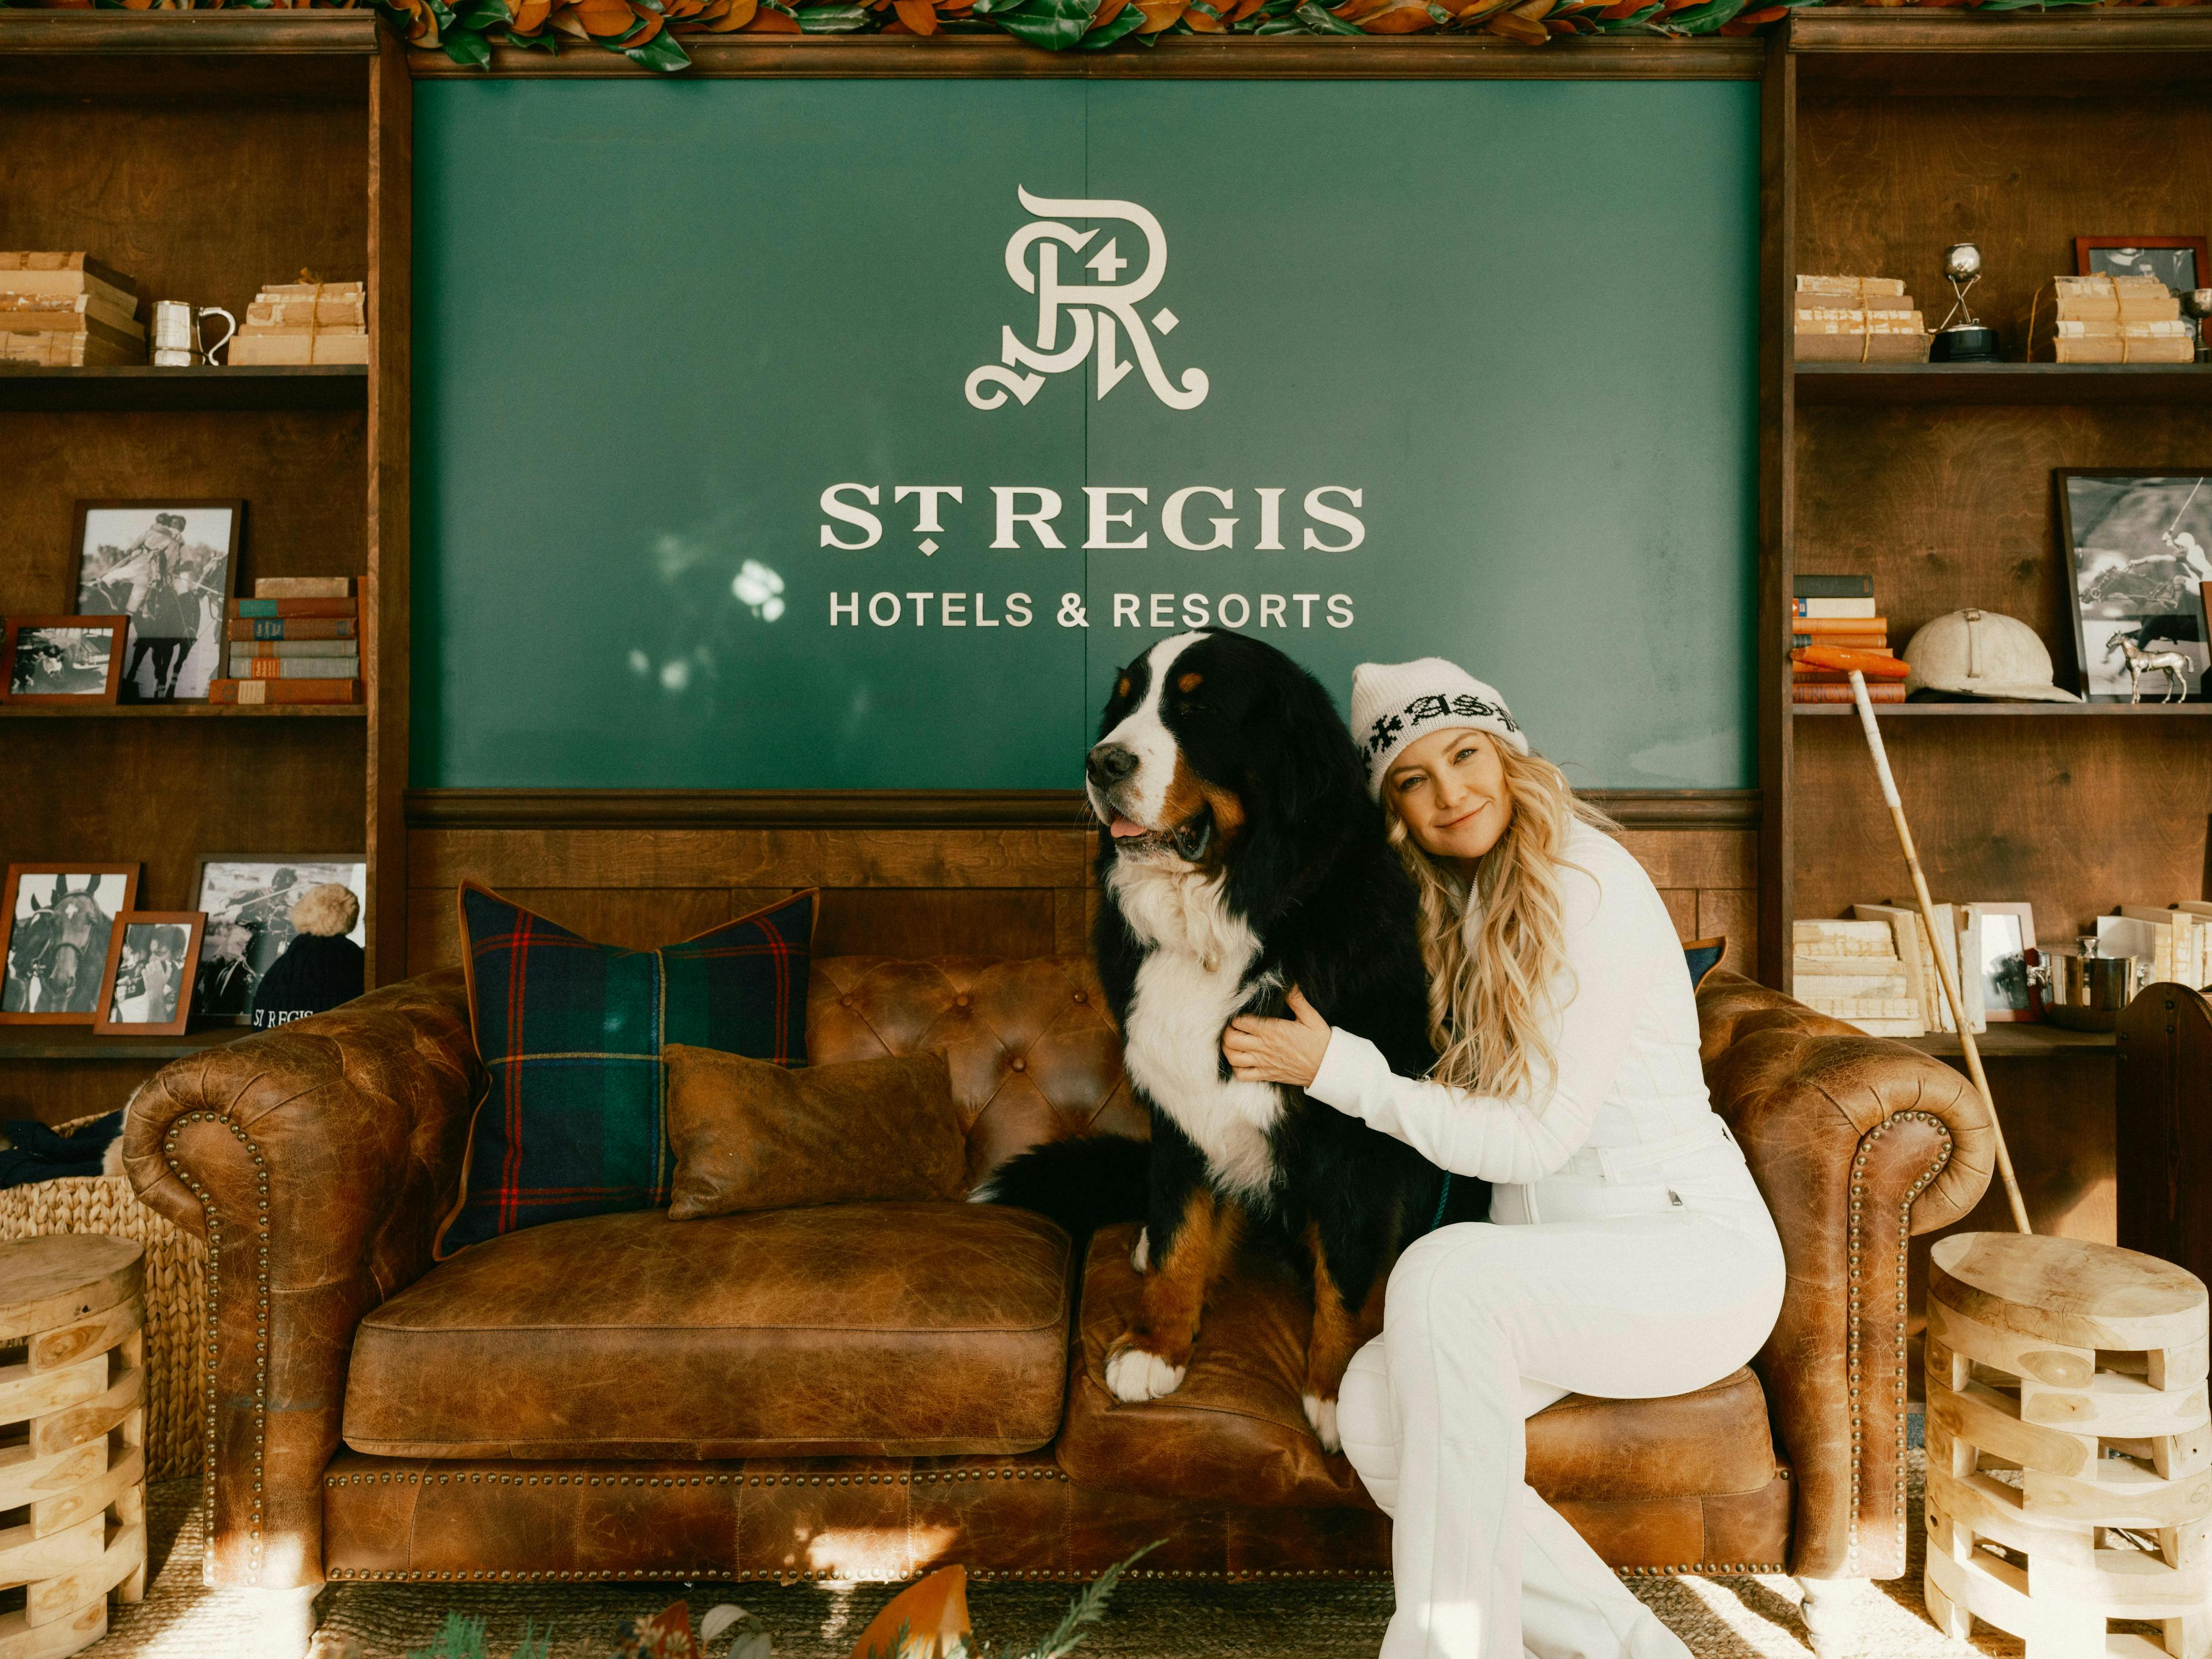 Kate Hudson on a couch with a dog green st regis sign behind her